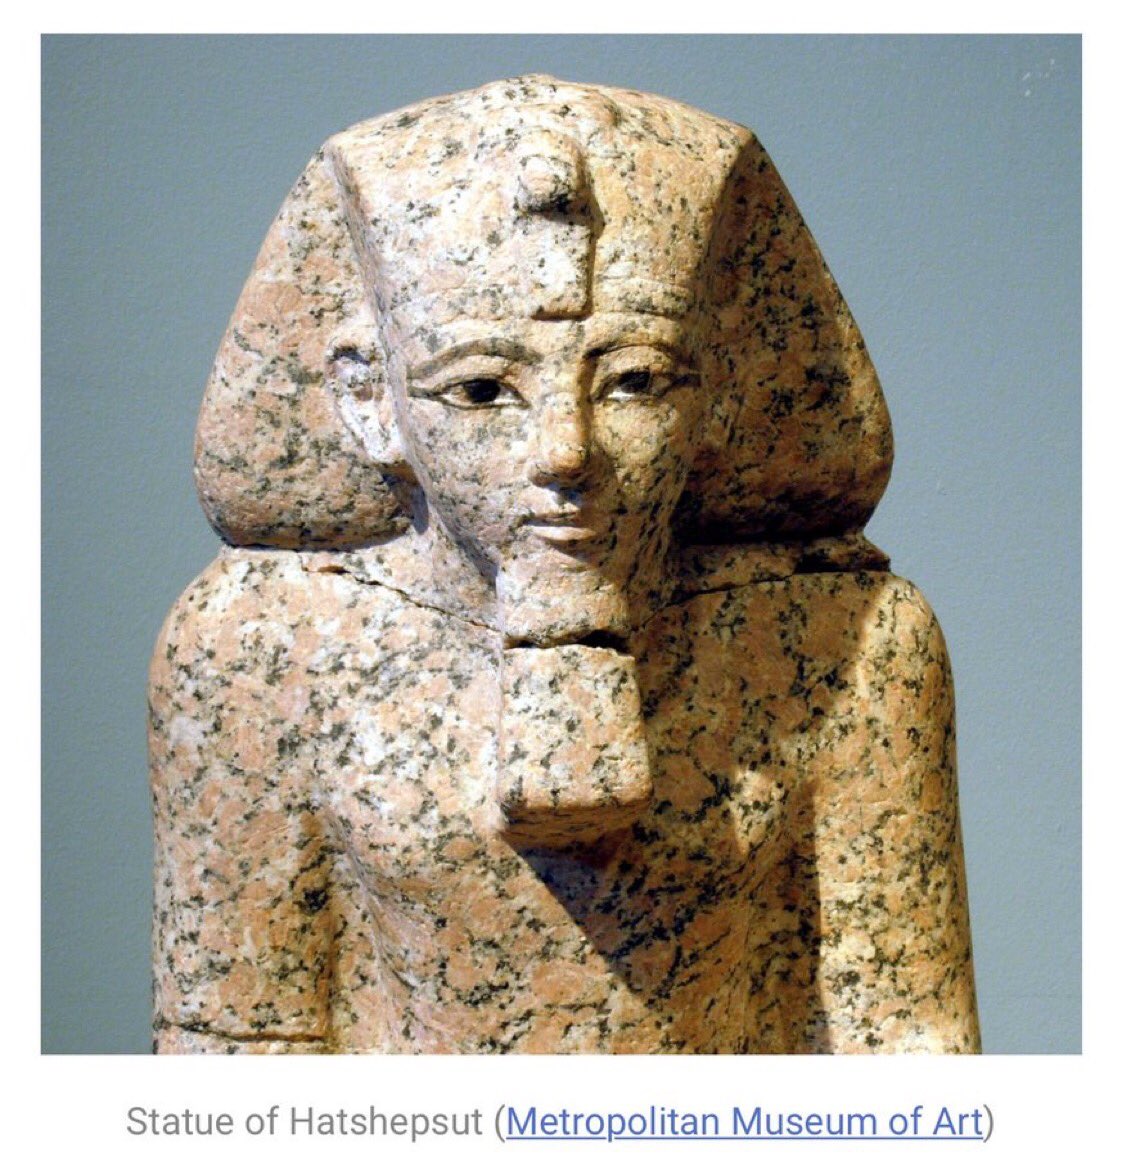 “As popular, political, medical, and legal discussions about gender identity have increased...so has the call for histories of diversity to go further than discussions of gay men.”  #Hatshepsut http://notchesblog.com/2017/04/11/egyptology-sexual-science-and-modern-gender-identity/